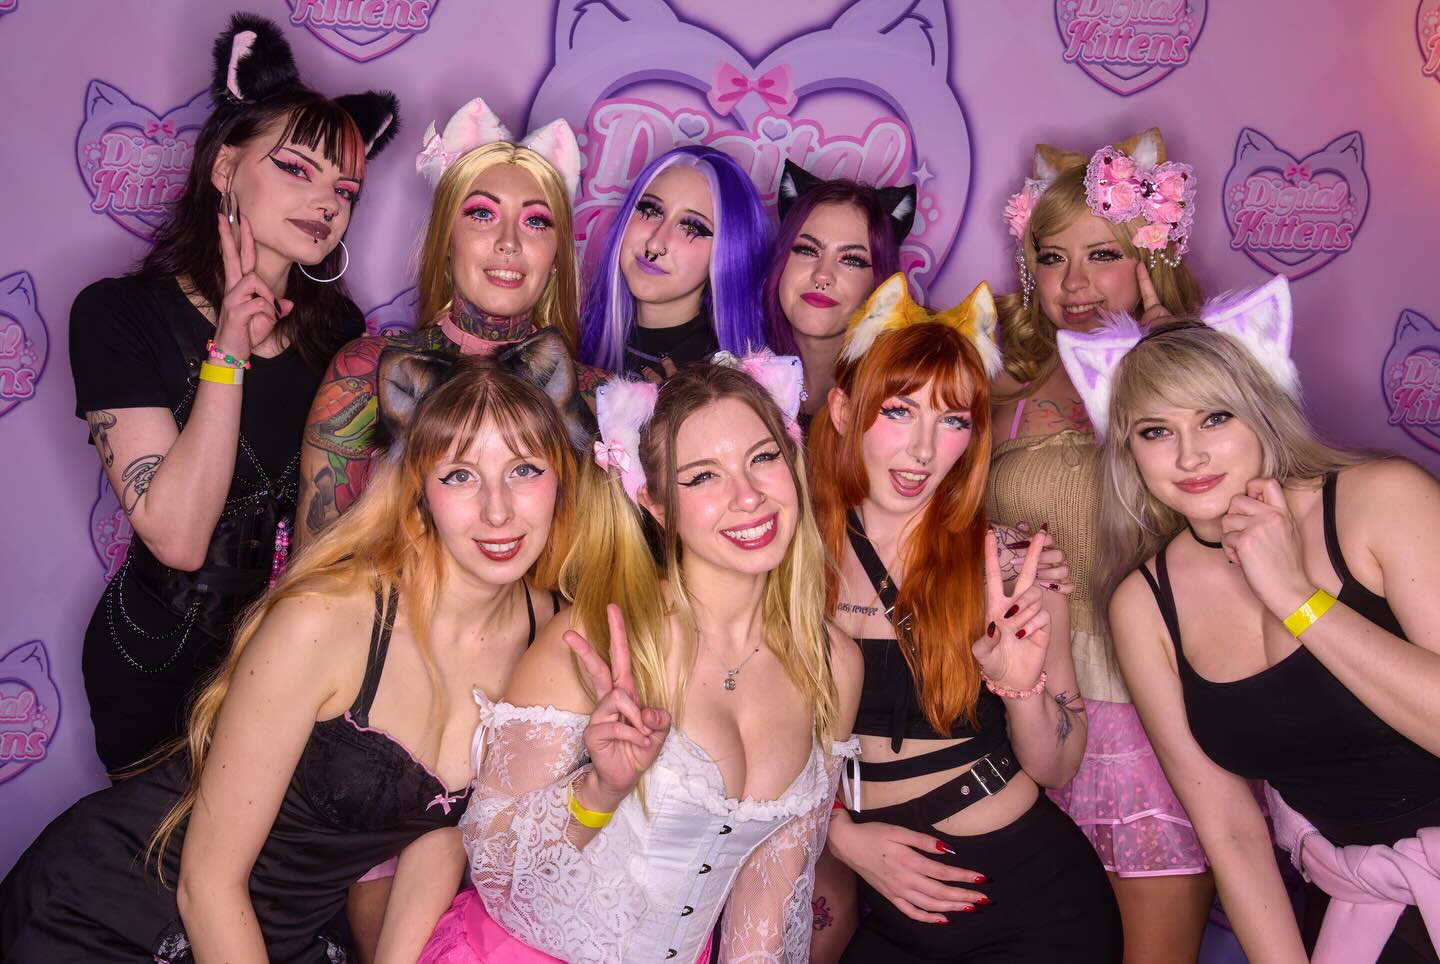 i figure most people have probably already seen these but i wanted to add a few of them to my feed soooo here they are again 😆

tyyy @digitalkittens for hosting such a fun event 😽💓 

photos by @spacemonkeyphotography